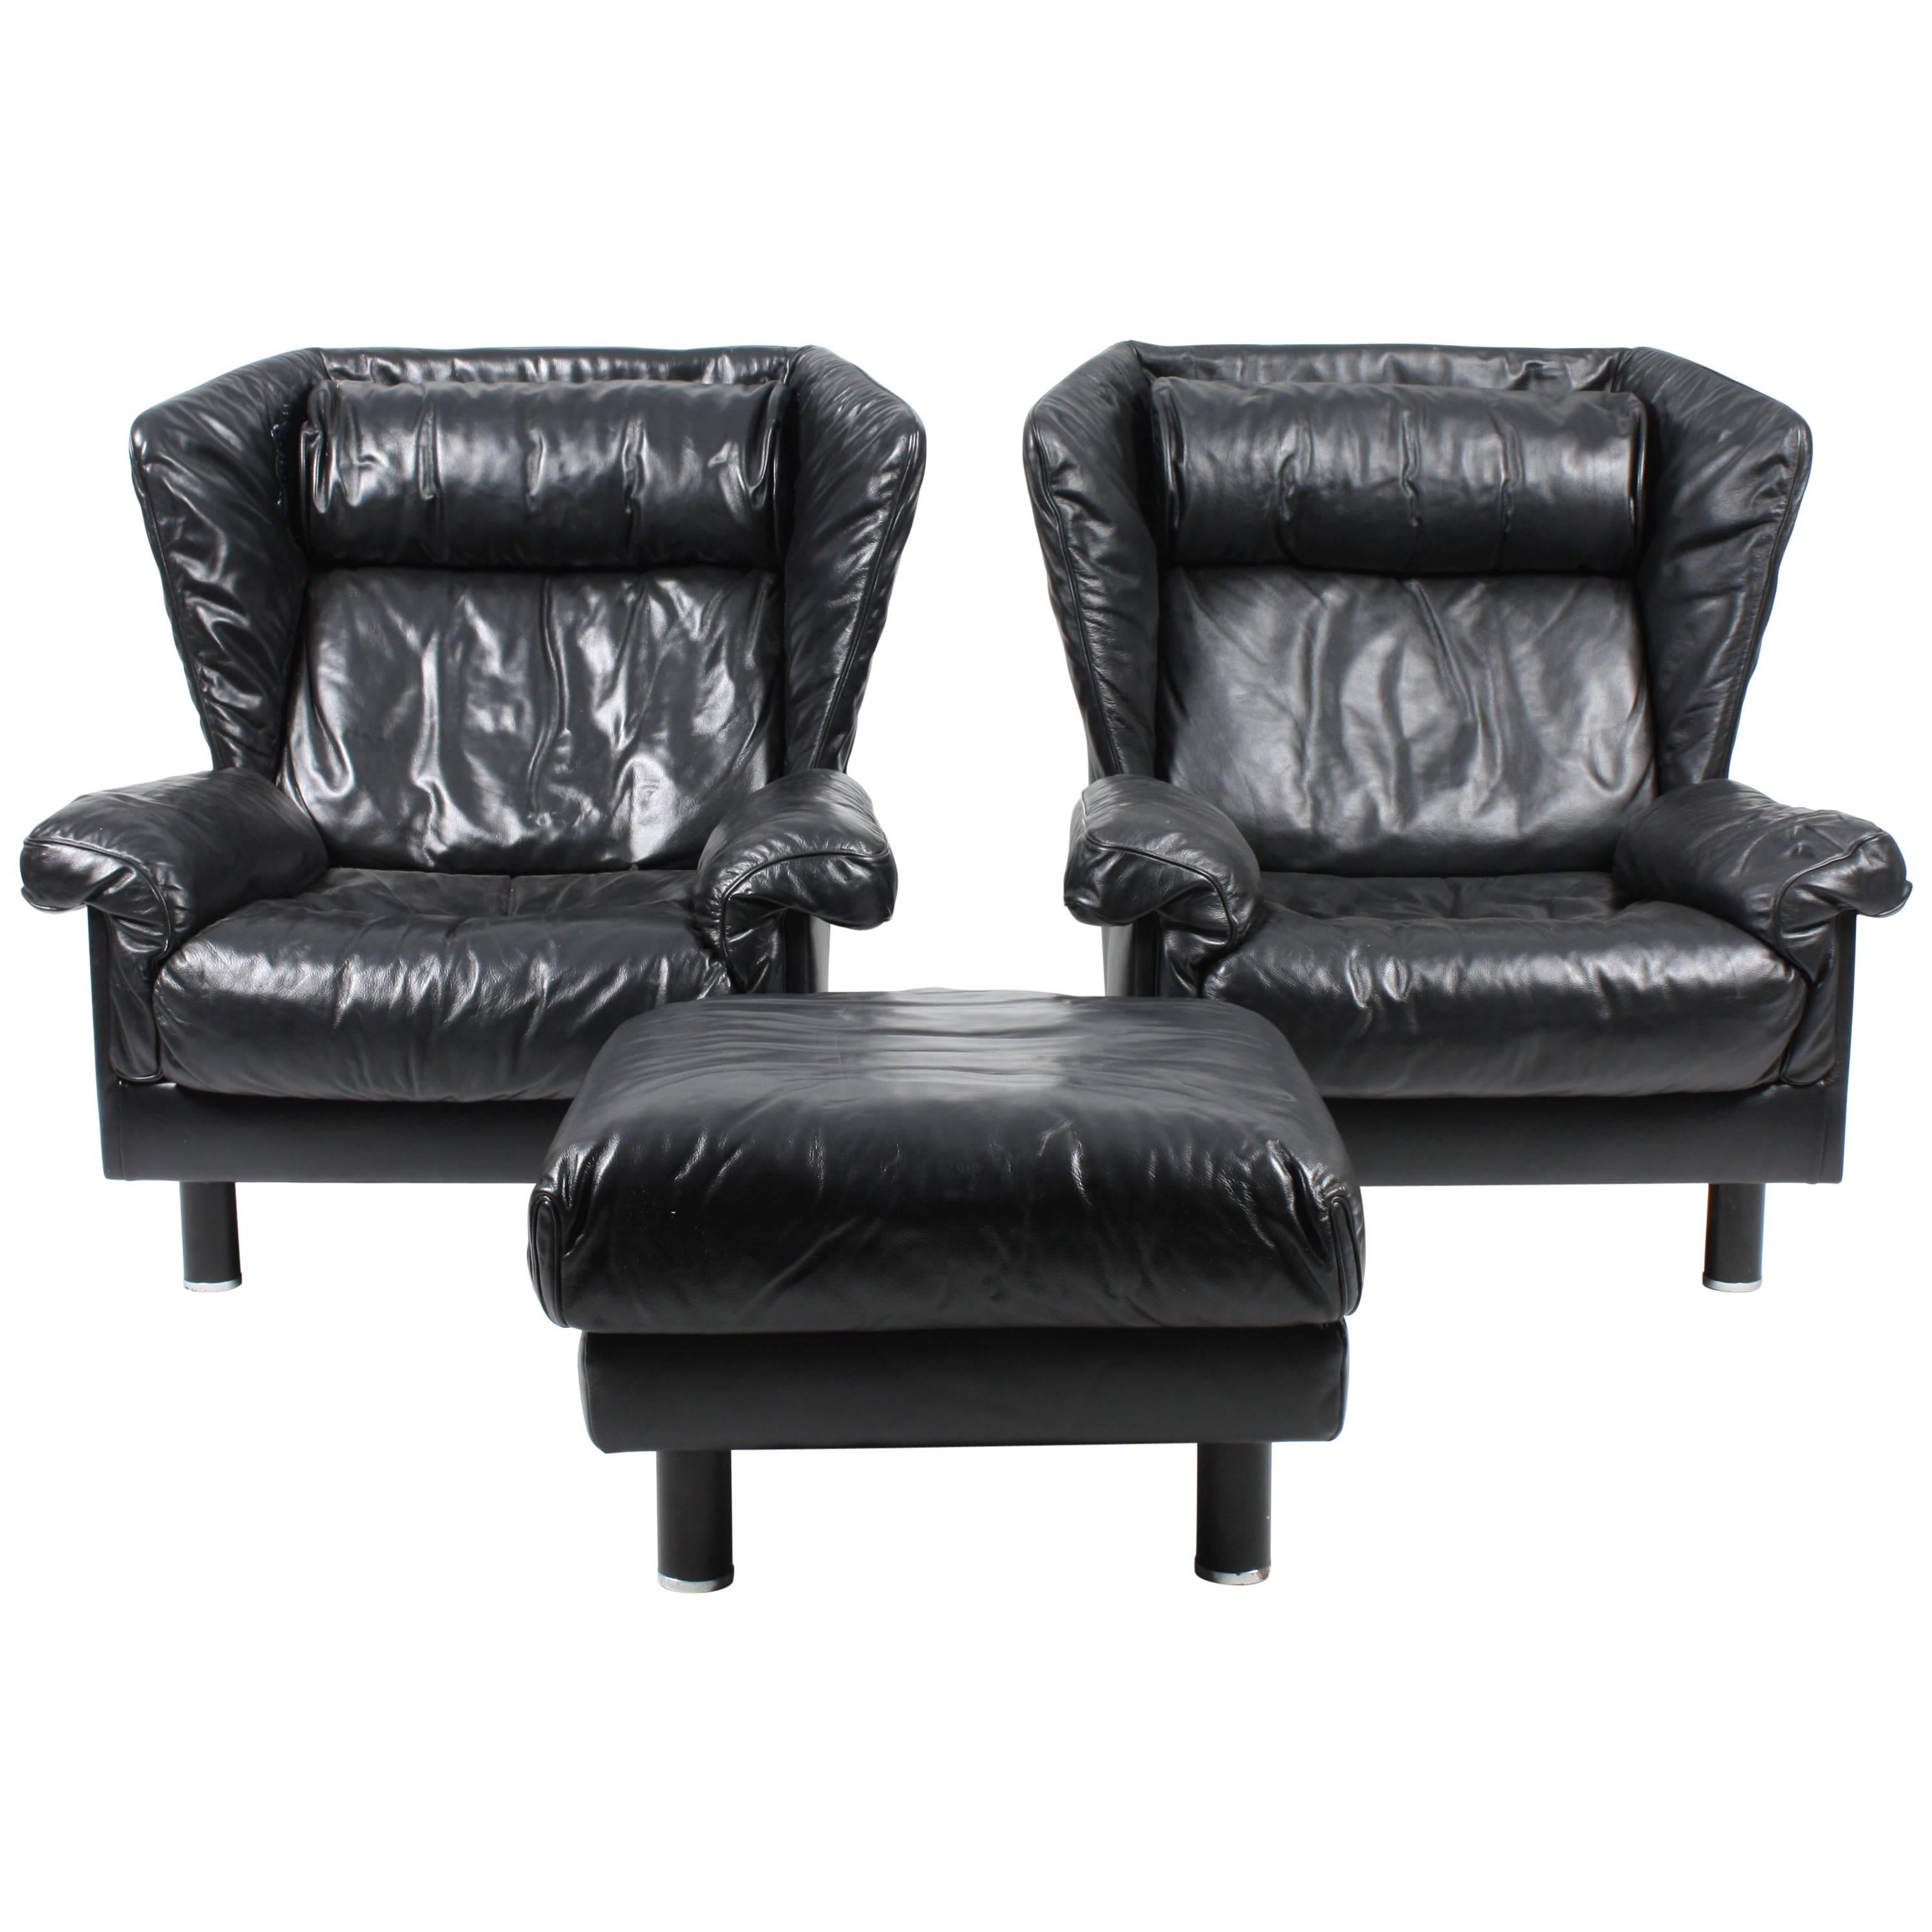 Pair of Lounge Chairs by De Sede